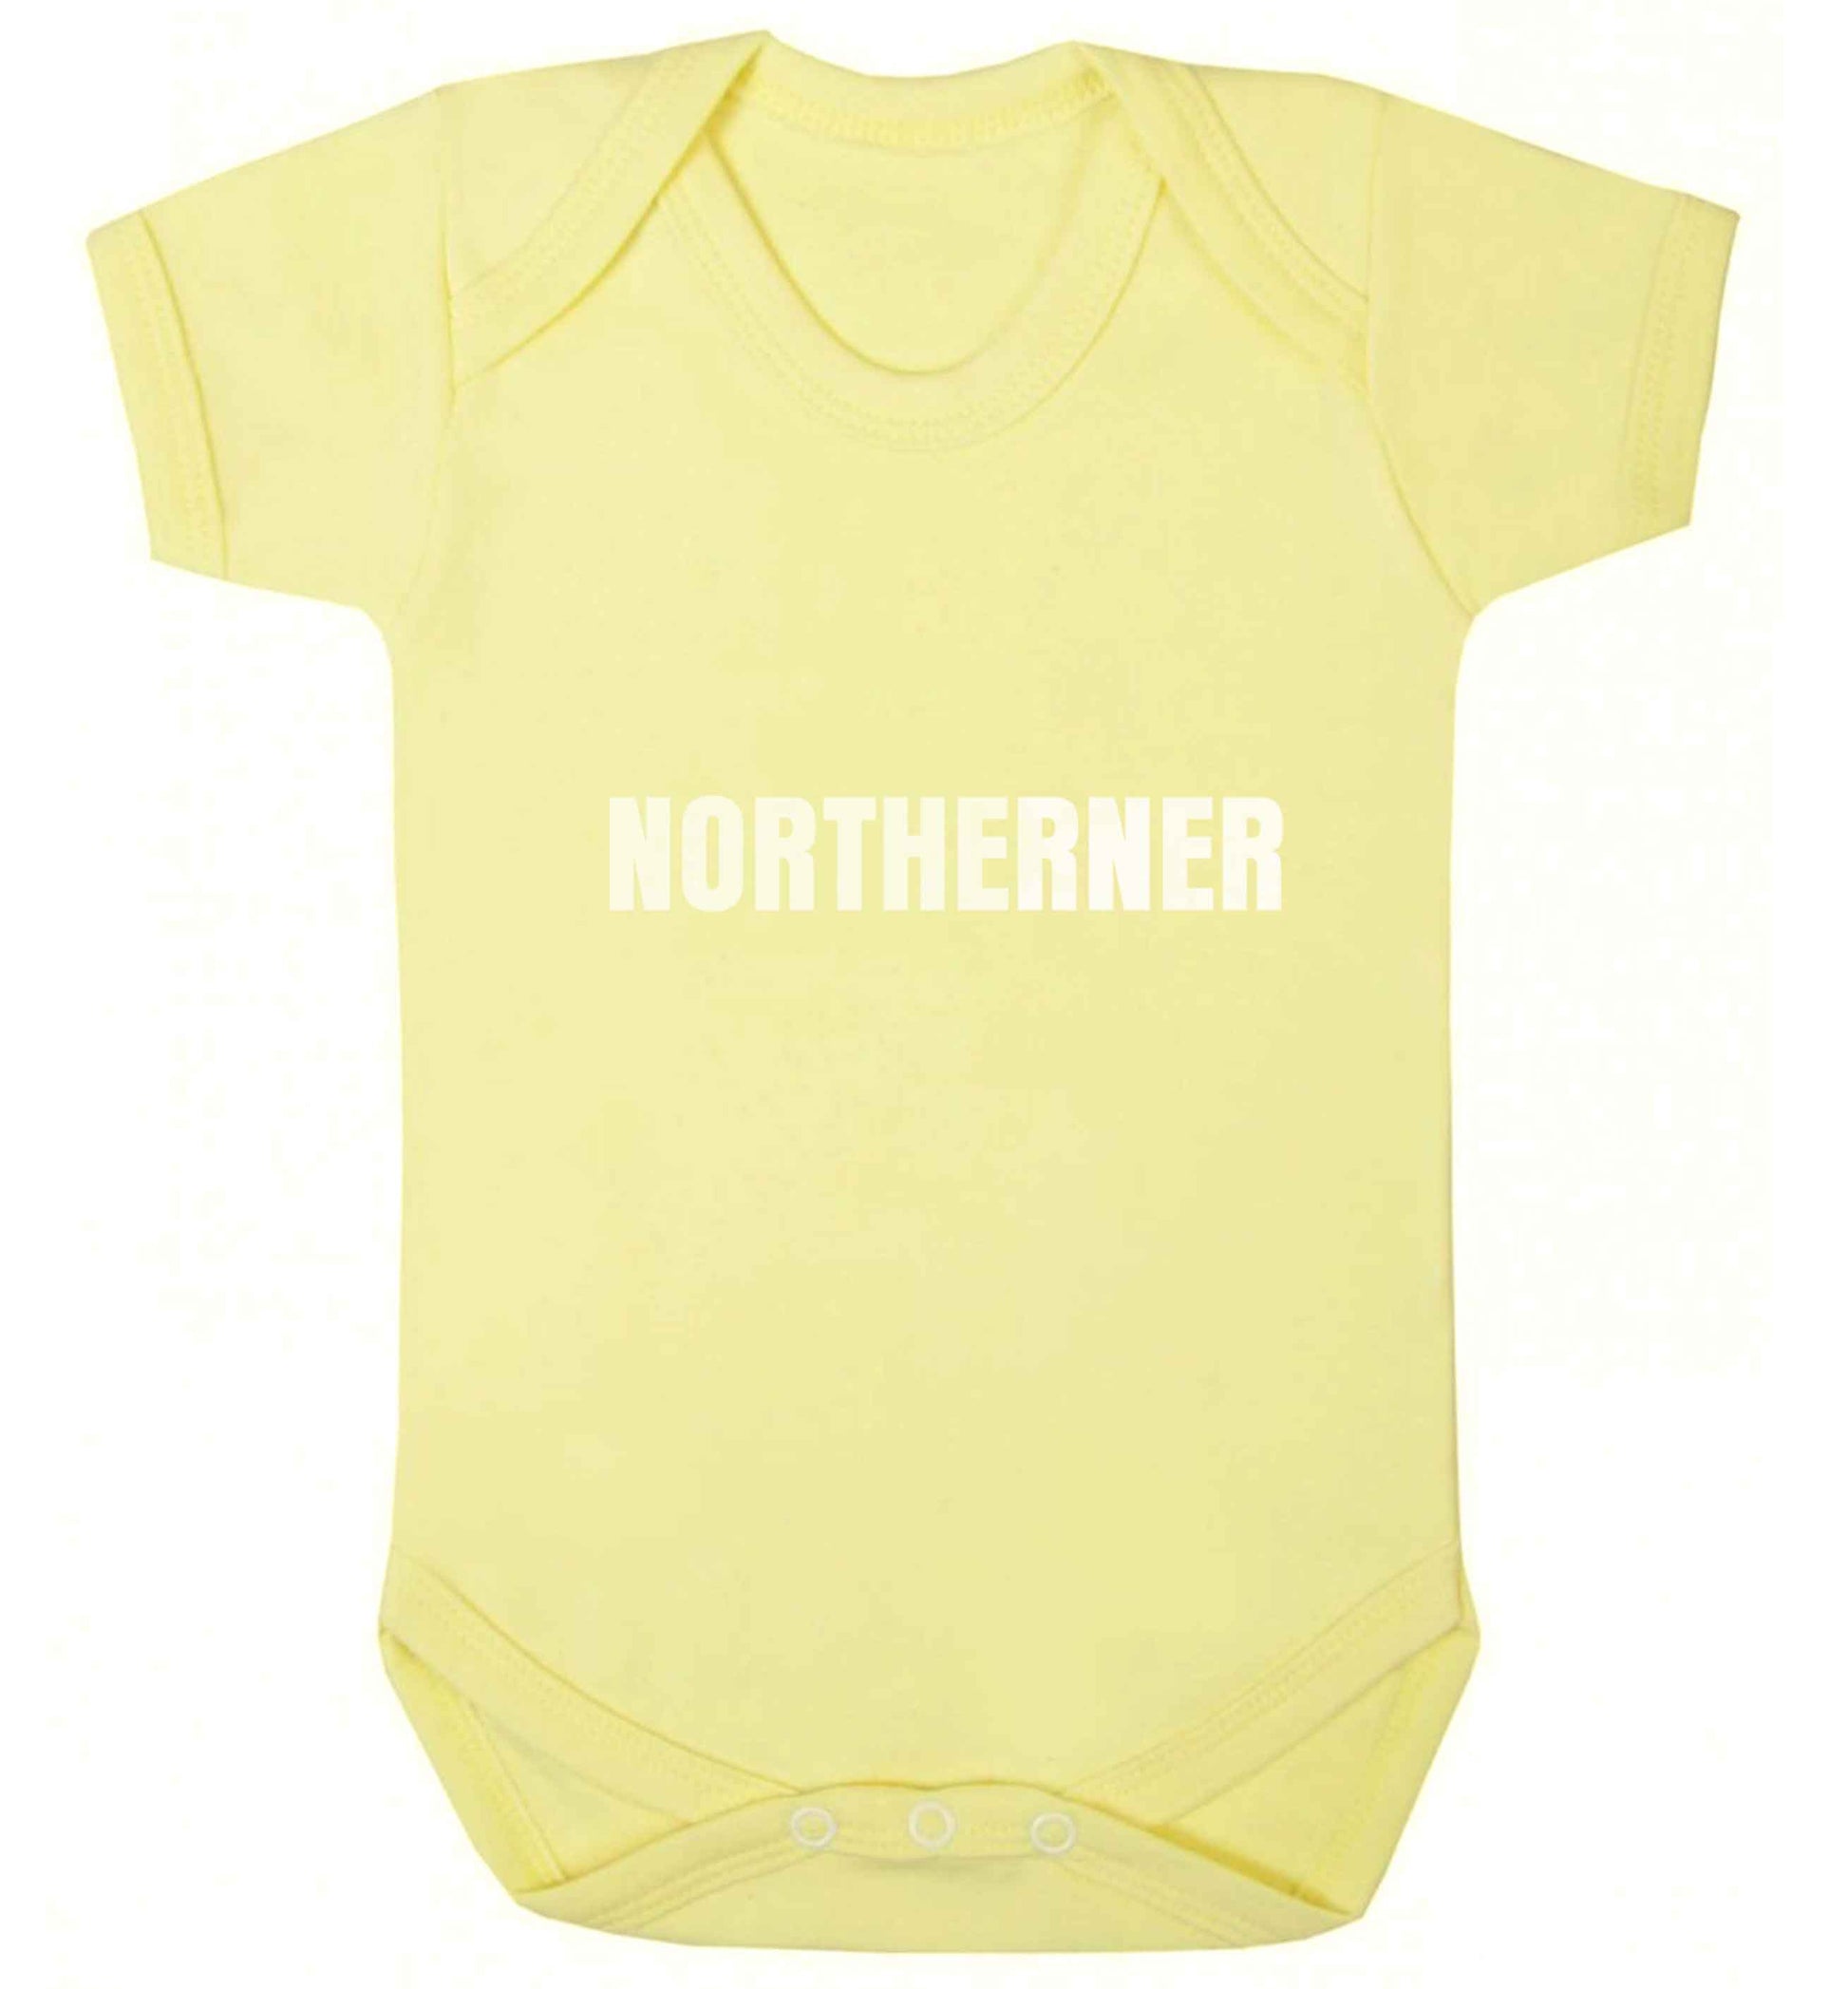 Northerner baby vest pale yellow 18-24 months